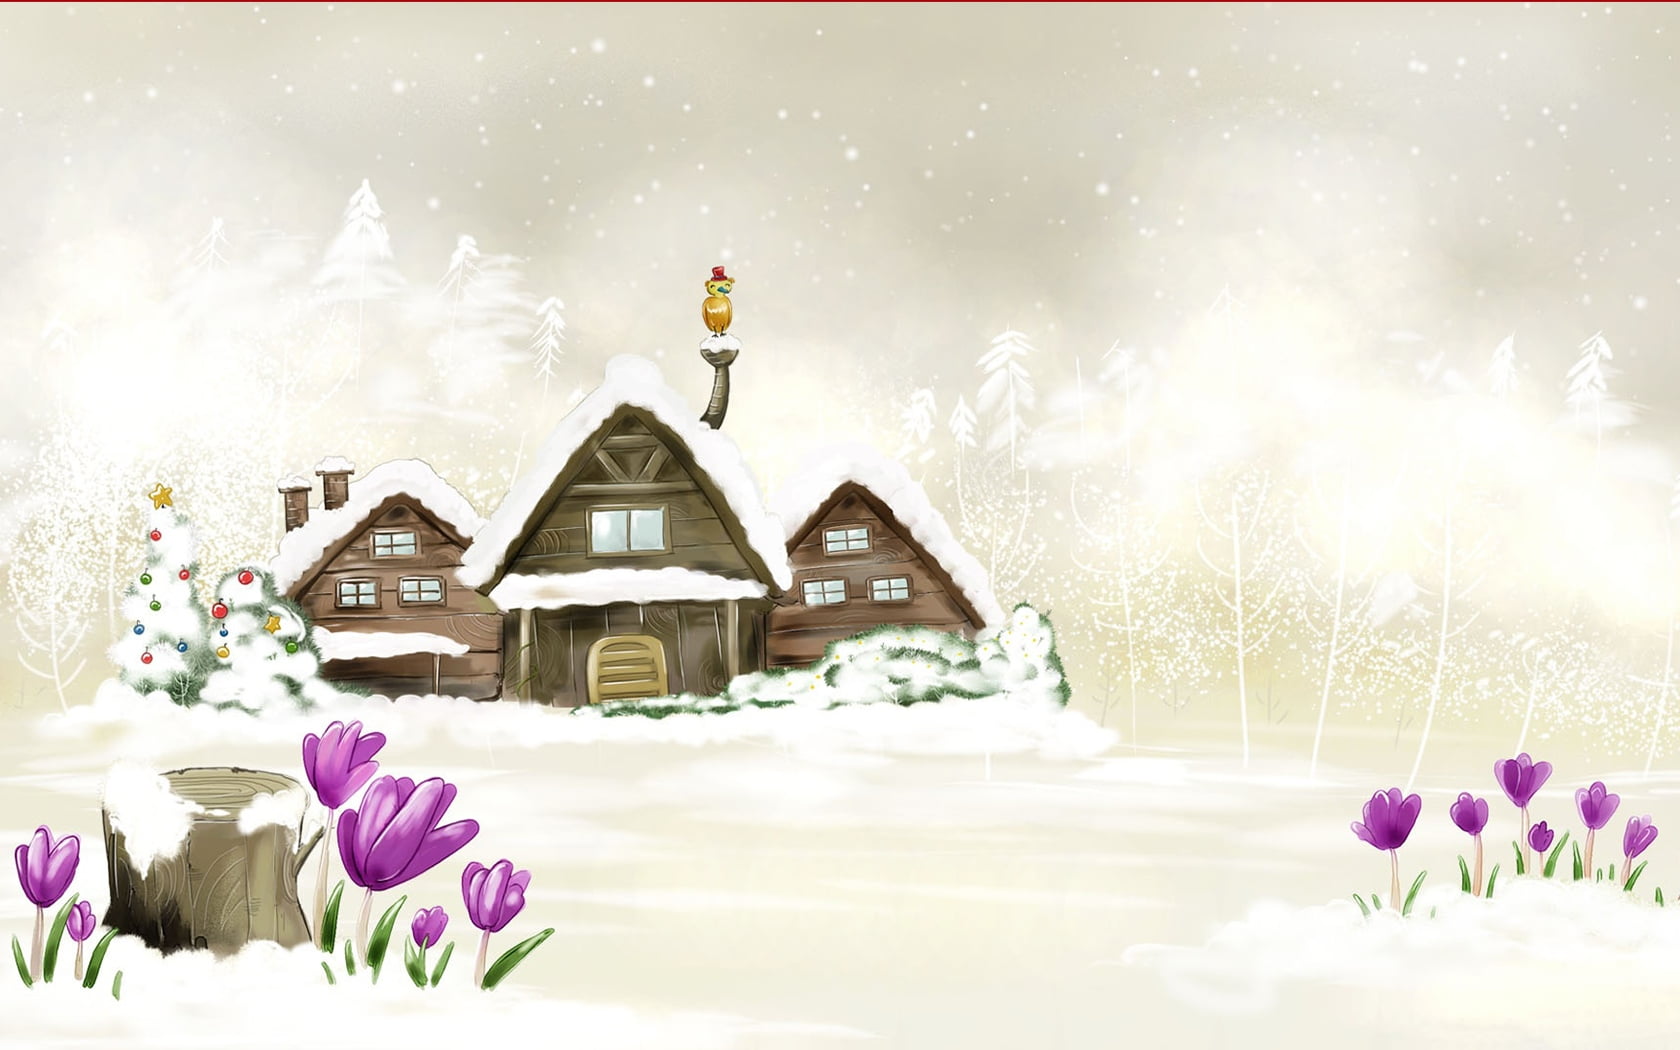 Brown 3 Storey House Covered With Snow Cartoon Wallpaper Hd Wallpaper Wallpaper Flare